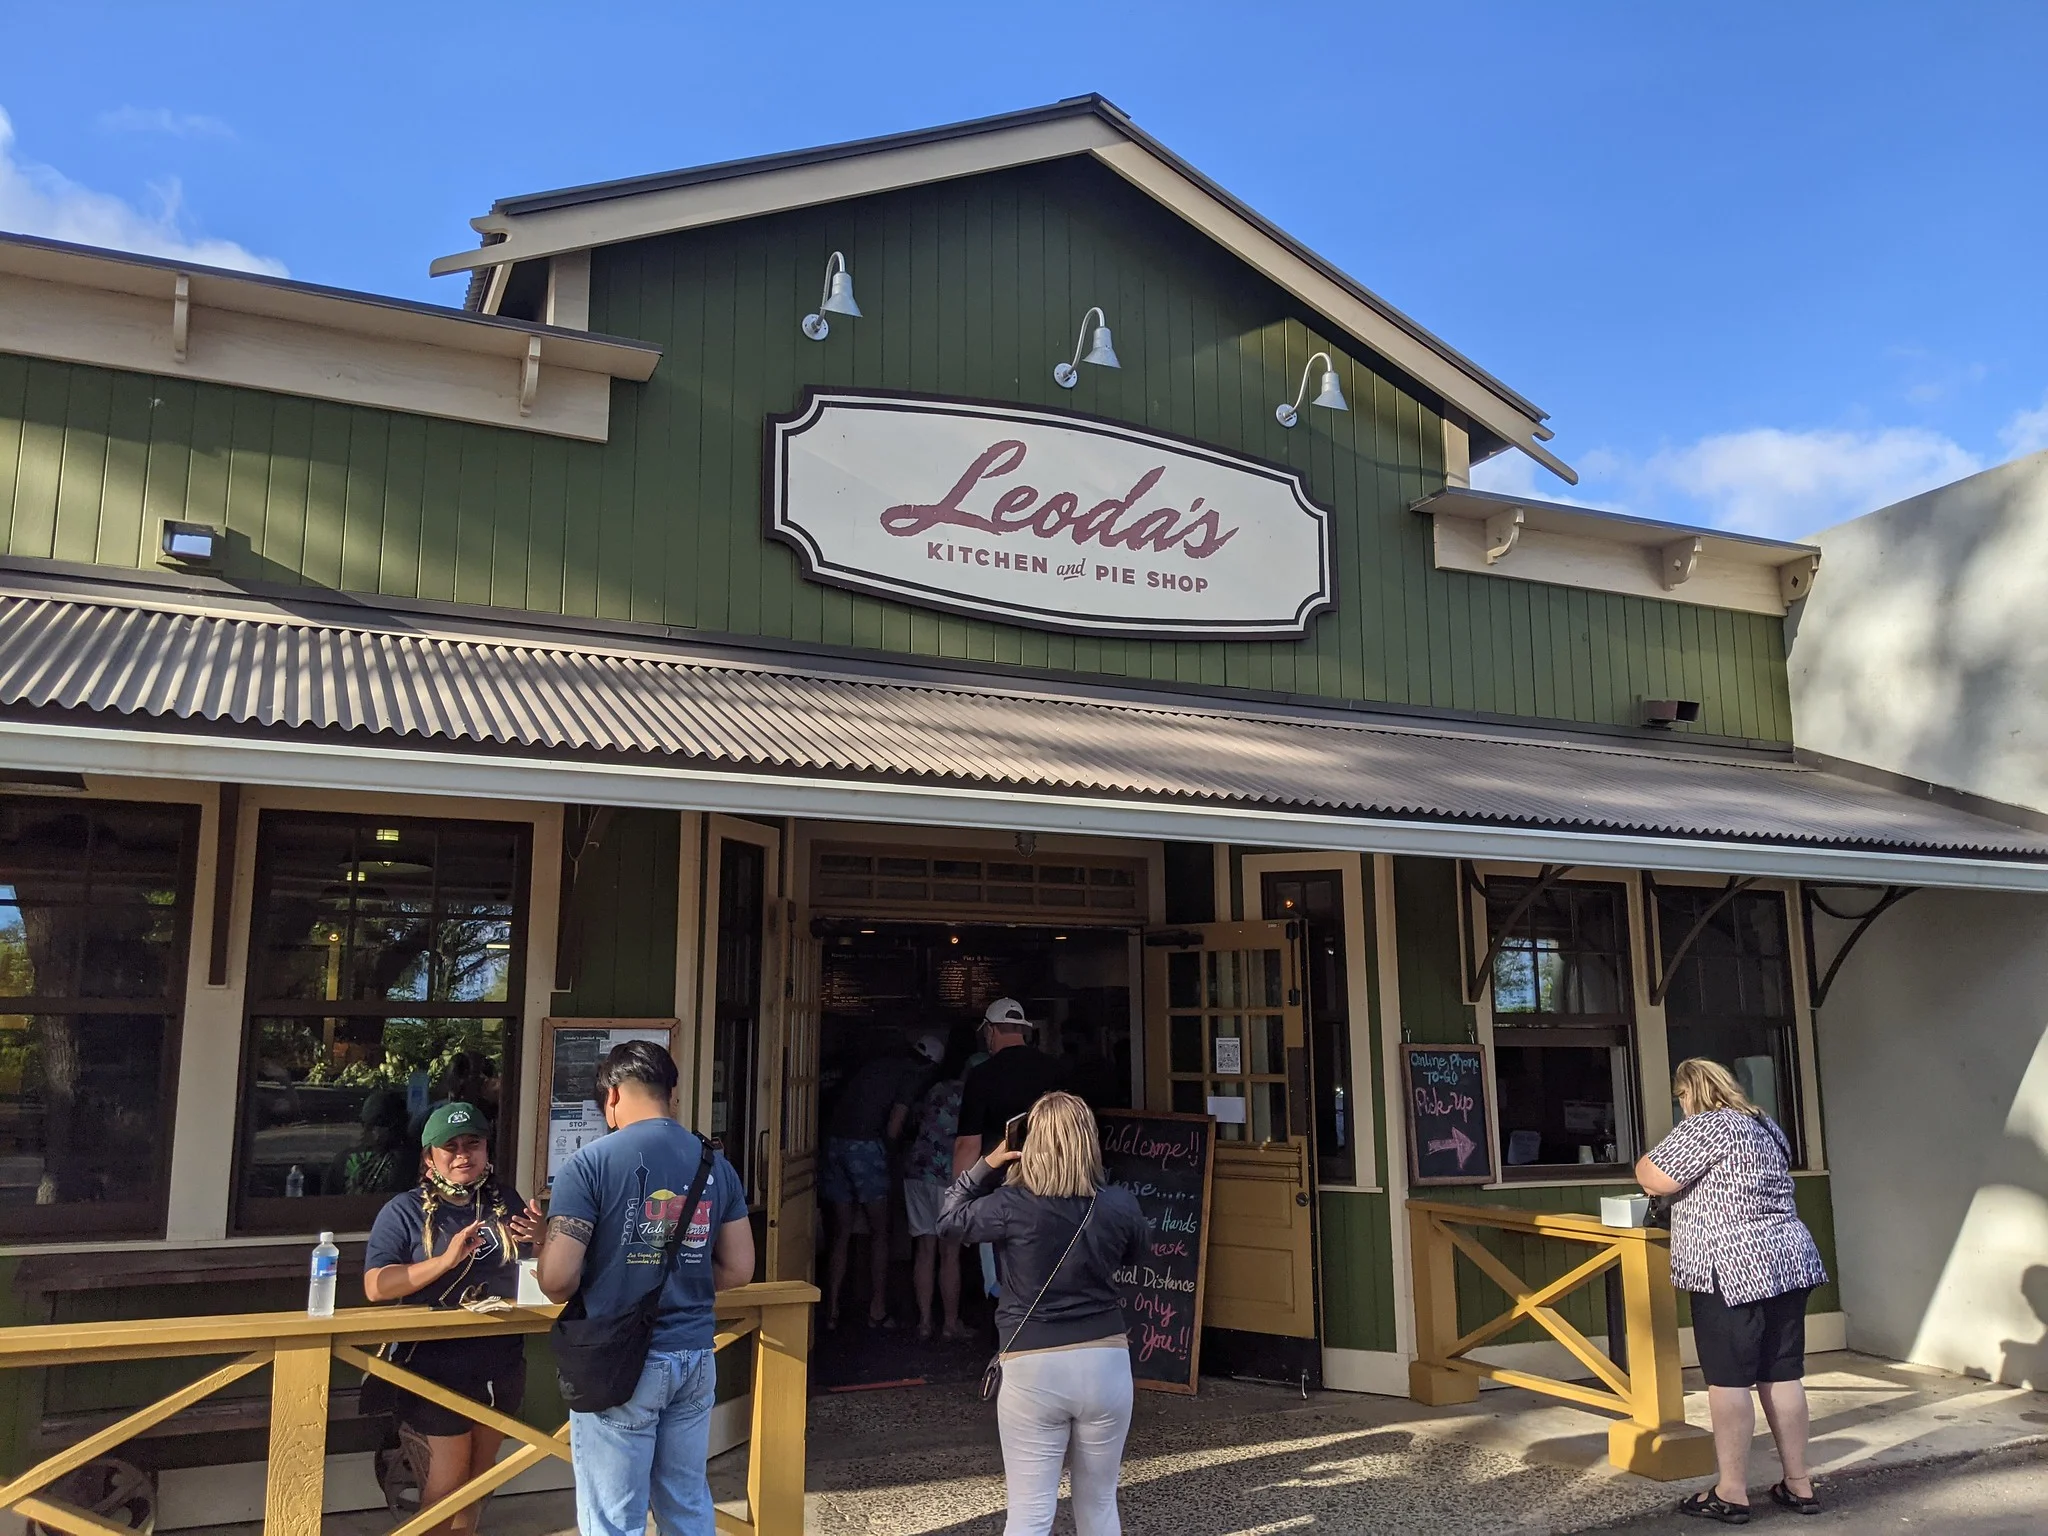 Tourist visiting the iconic Leoda’s Kitchen and Pie Shop, considered as one of the best restaurants in Maui, Hawaii, where some are lining up at the counter, and others waiting outside with their box of baked goods